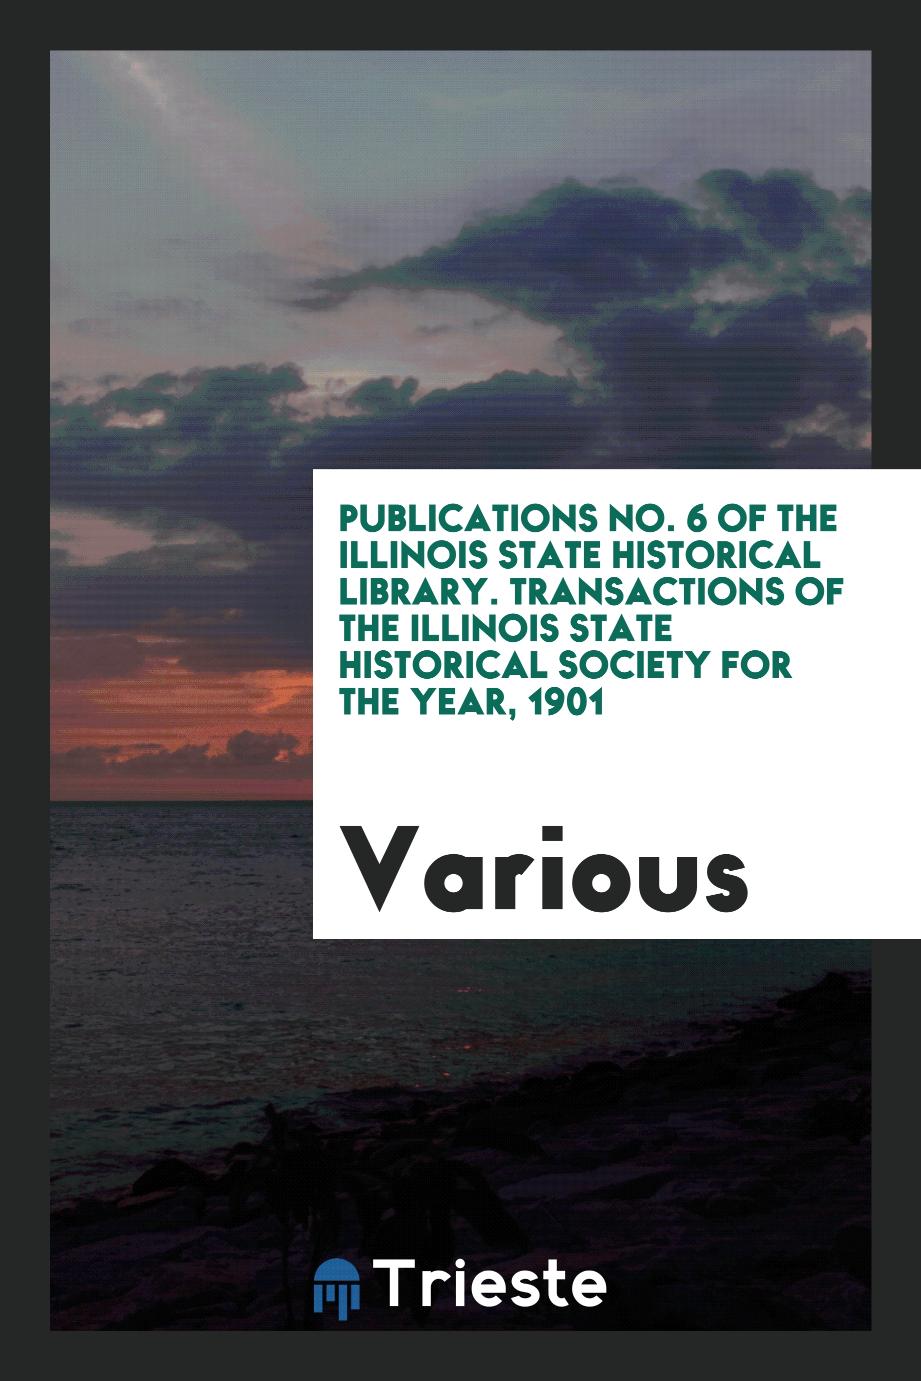 Publications No. 6 of the Illinois State Historical Library. Transactions of the Illinois State Historical Society for the Year, 1901